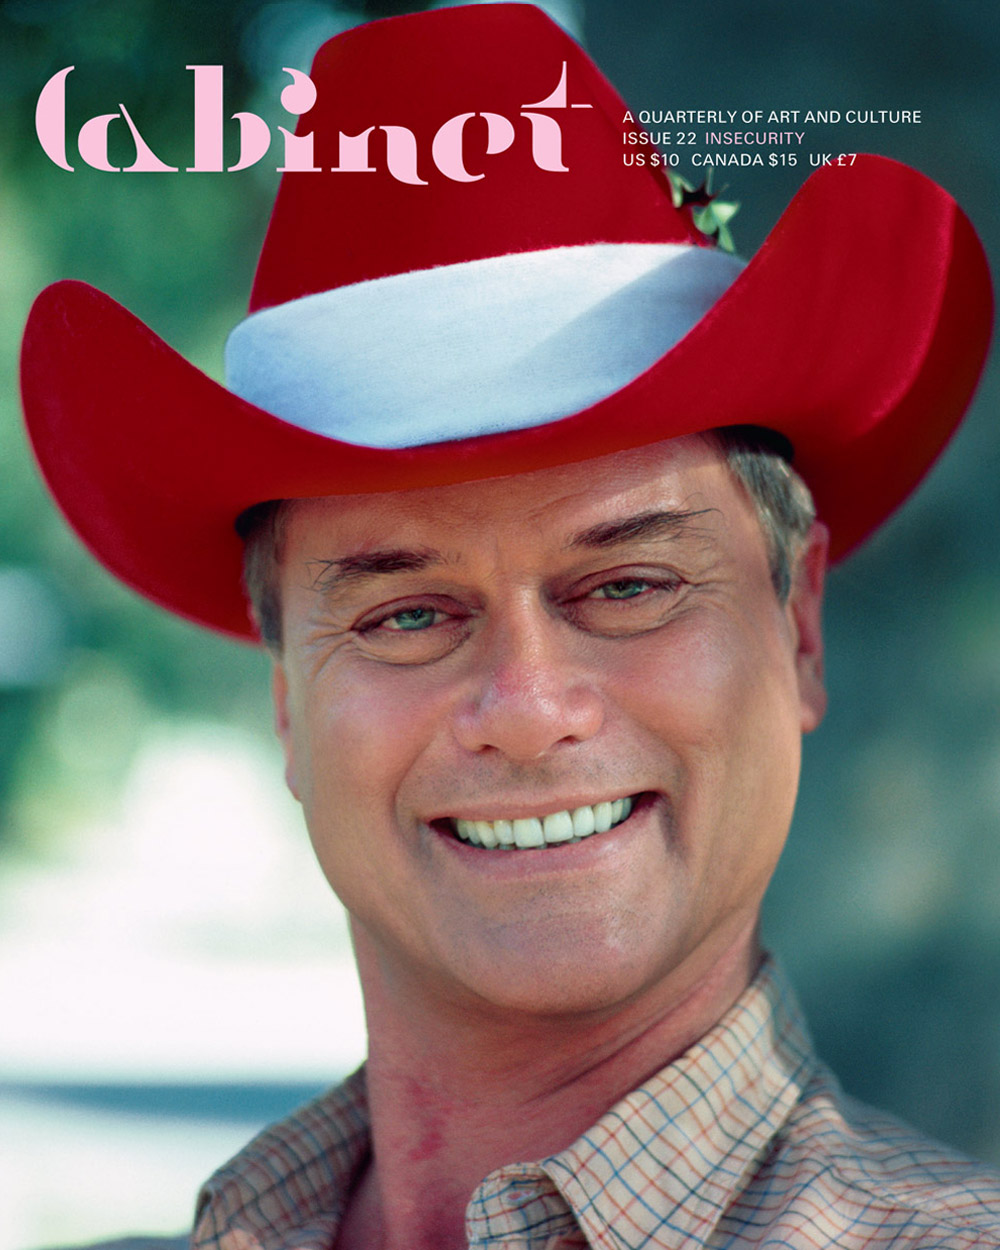 A 1980 photograph by artist Hasse Persson which depicts a headshot of actor Larry Hagman smiling at the camera and in costume for his role as J. R. Ewing on the television series Dallas. The show epitomized the sense of entitlement and cocksureness that came to characterize Reagan-era America.